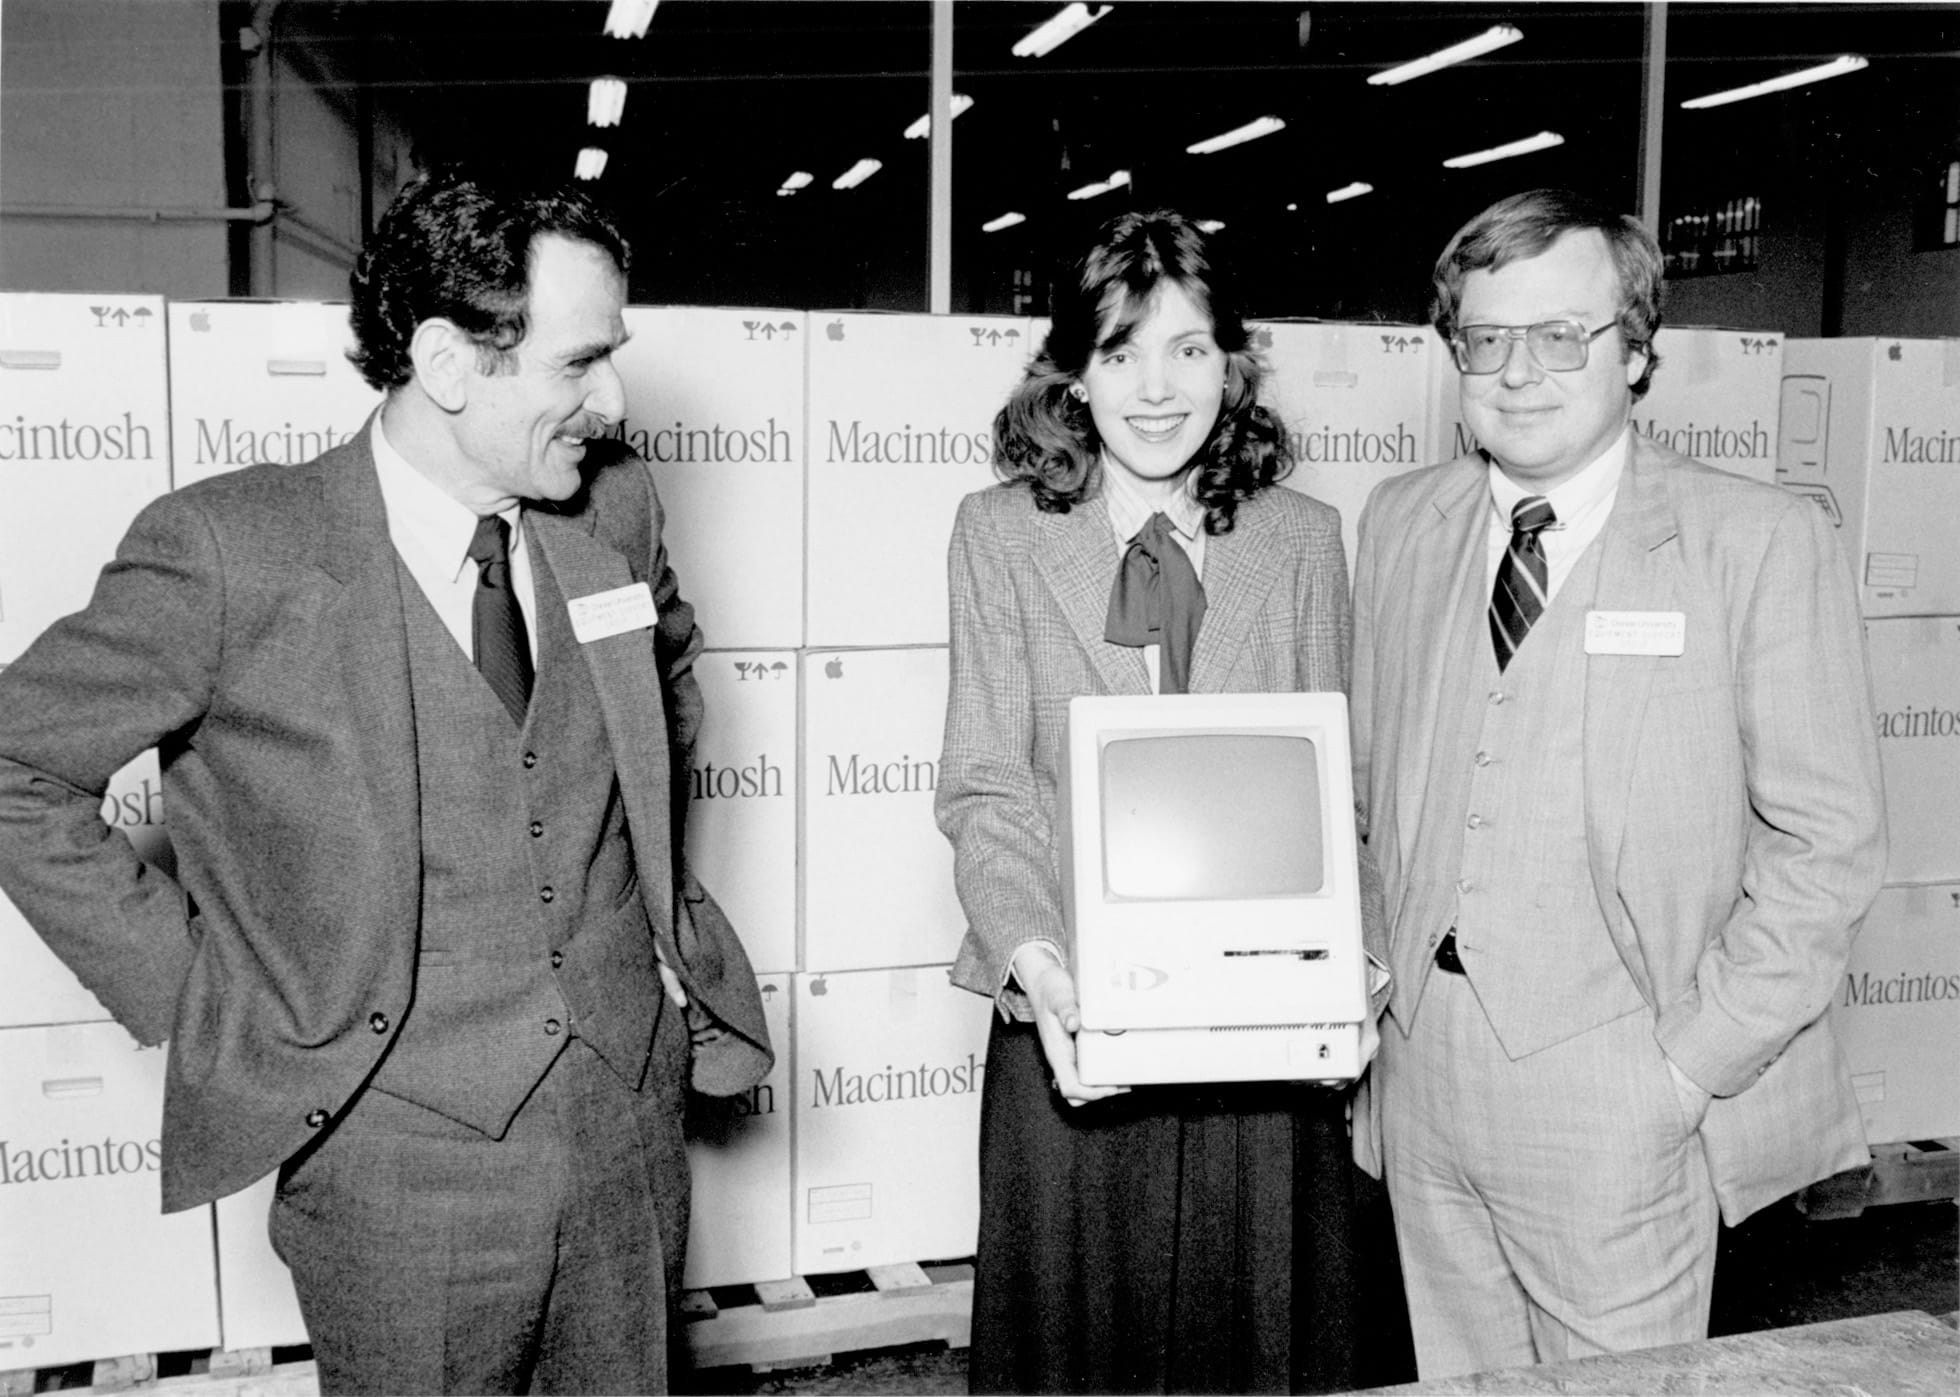 Vice President for Academic Affairs Bernie Sagik, left, and Assistant Vice President for Academic Affairs and Drexel Microcomputing Program Director Brian Hawkins, right, with a Drexel student on a distribution day of the Macintosh computers in March 1984. Photo courtesy Drexel University Archives.